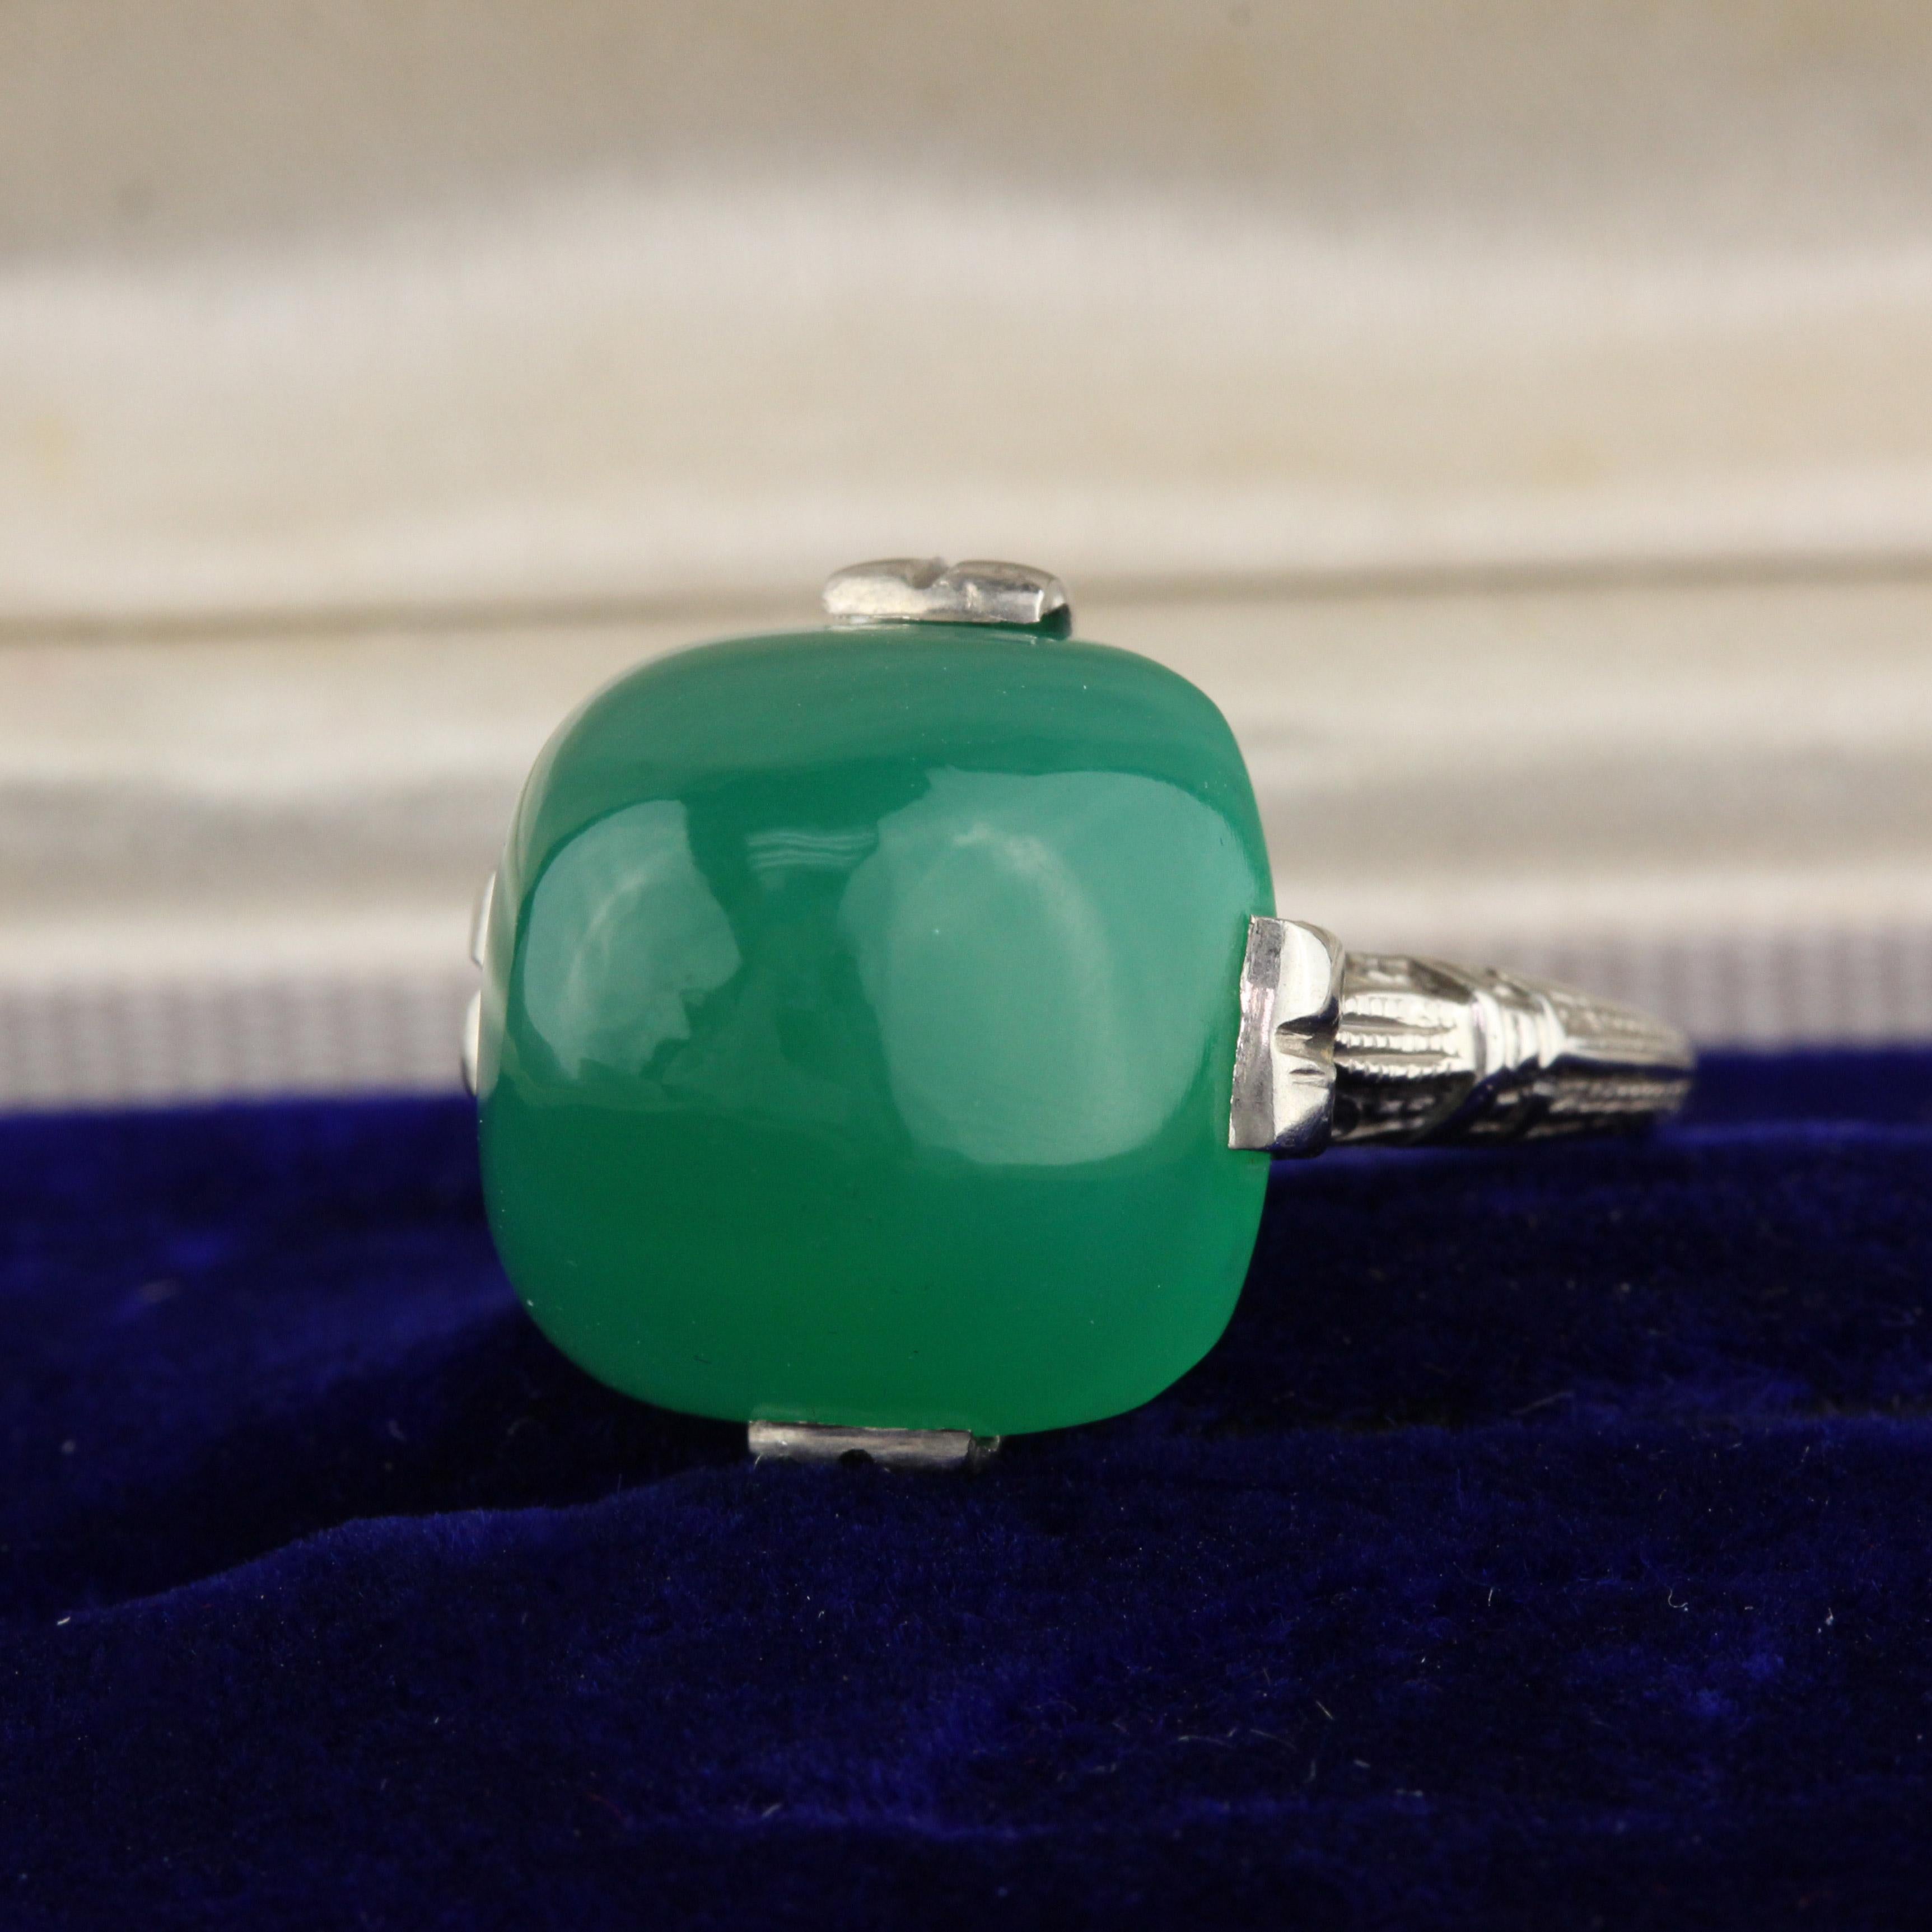 Beautiful Art Deco Engraved Mounting showcases a green cabochon chrysoprase in this antique ring.

#R0011

Metal: 14K White Gold

Weight: 4.4 grams

Ring Size: 3 1/4

This ring can be sized for a $30 fee!

*Please note that we cannot accept returns